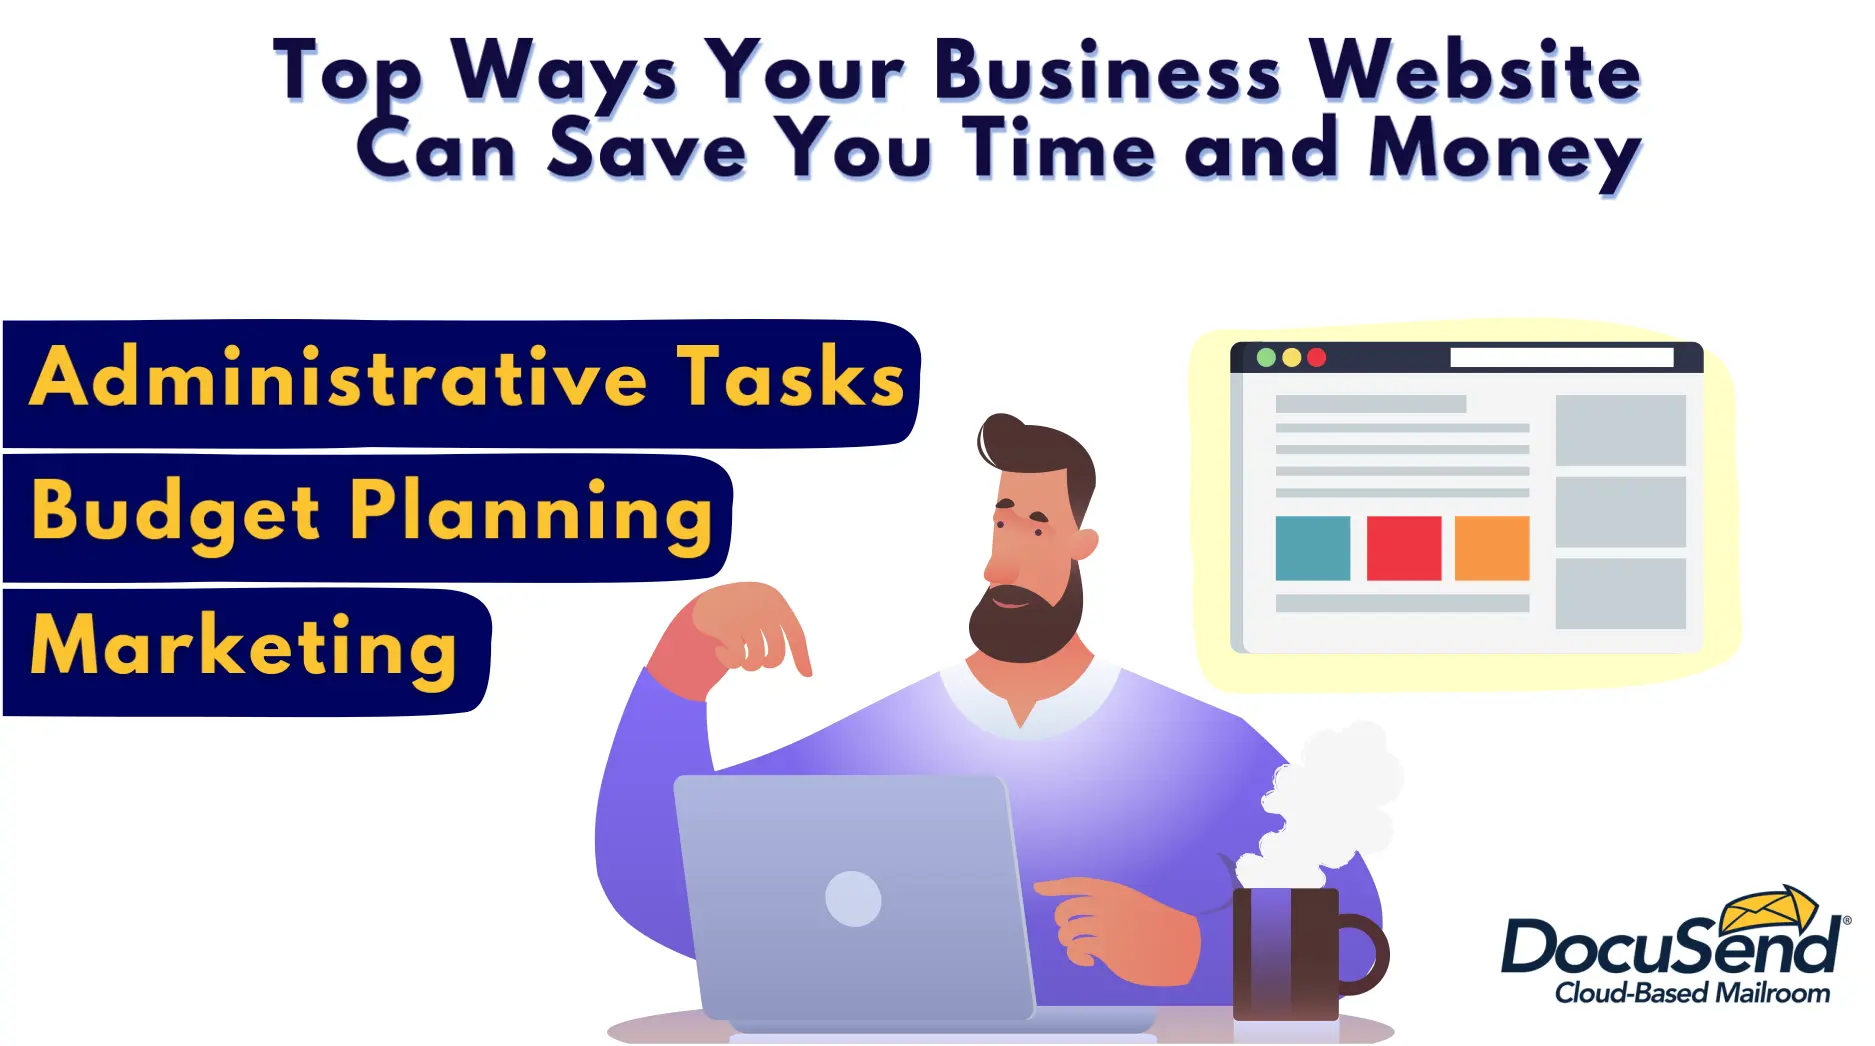 Does a Business Website Save You Time?